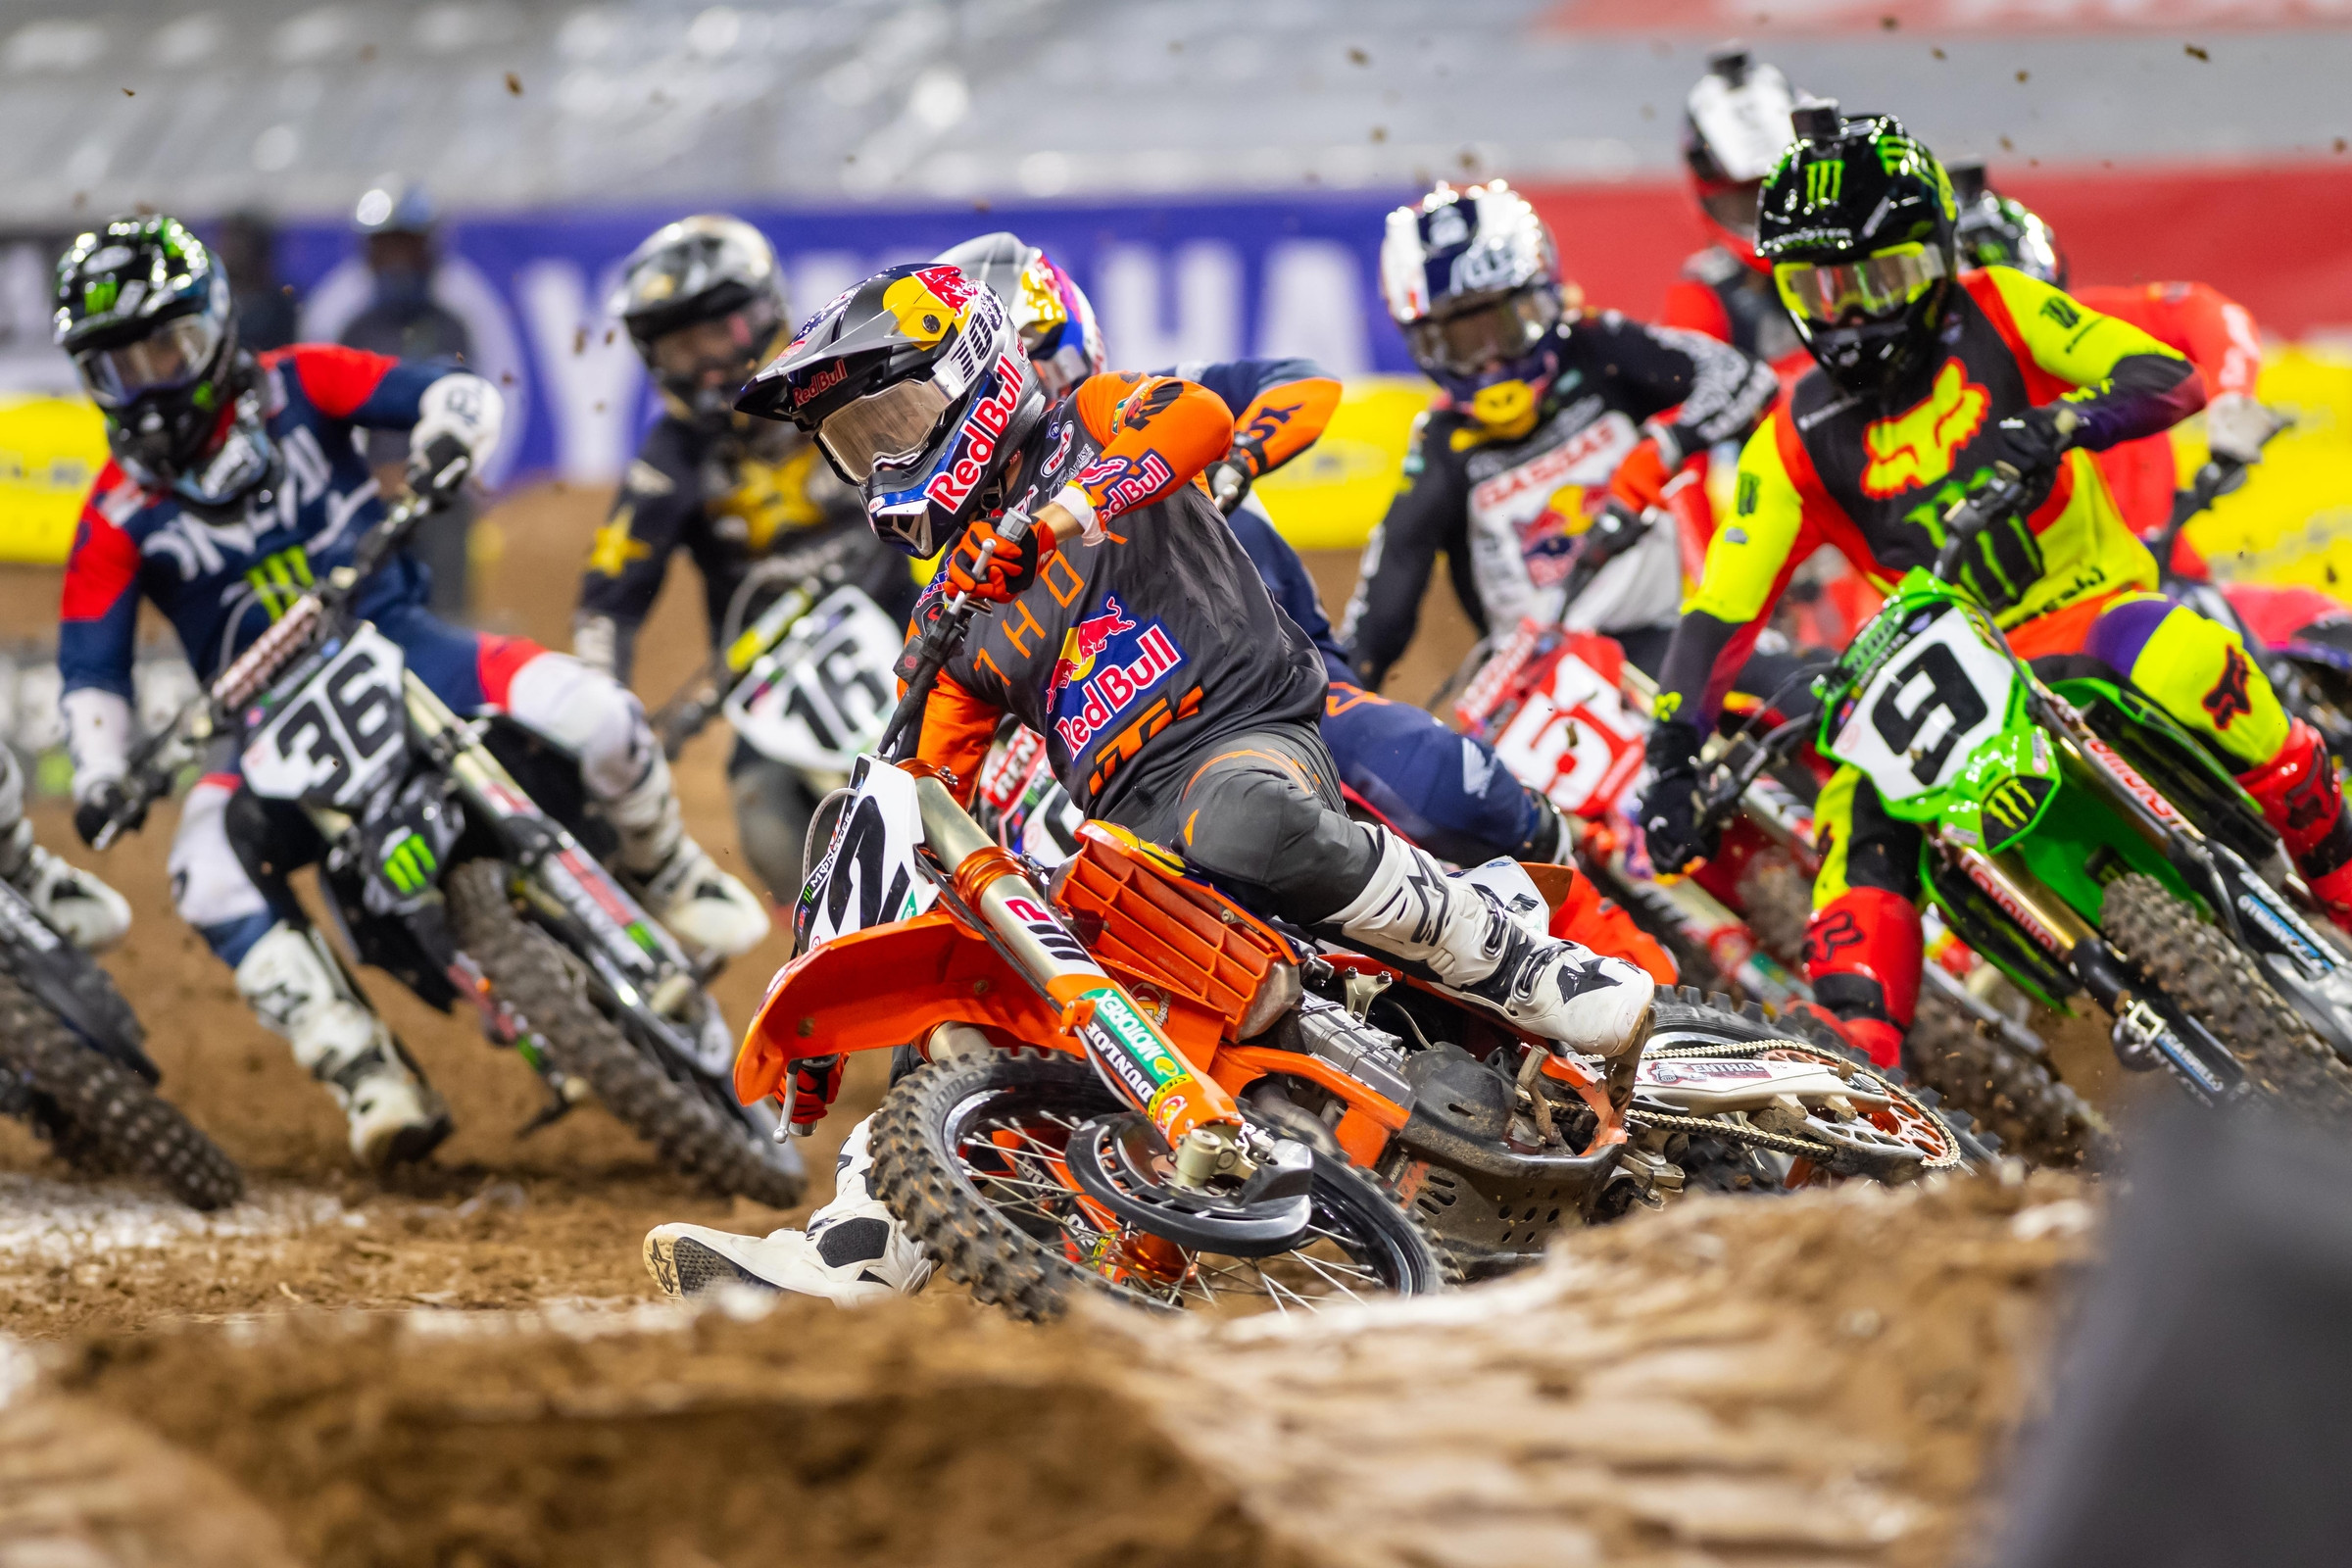 2022 Monster Energy AMA Supercross Broadcast Schedule Announced